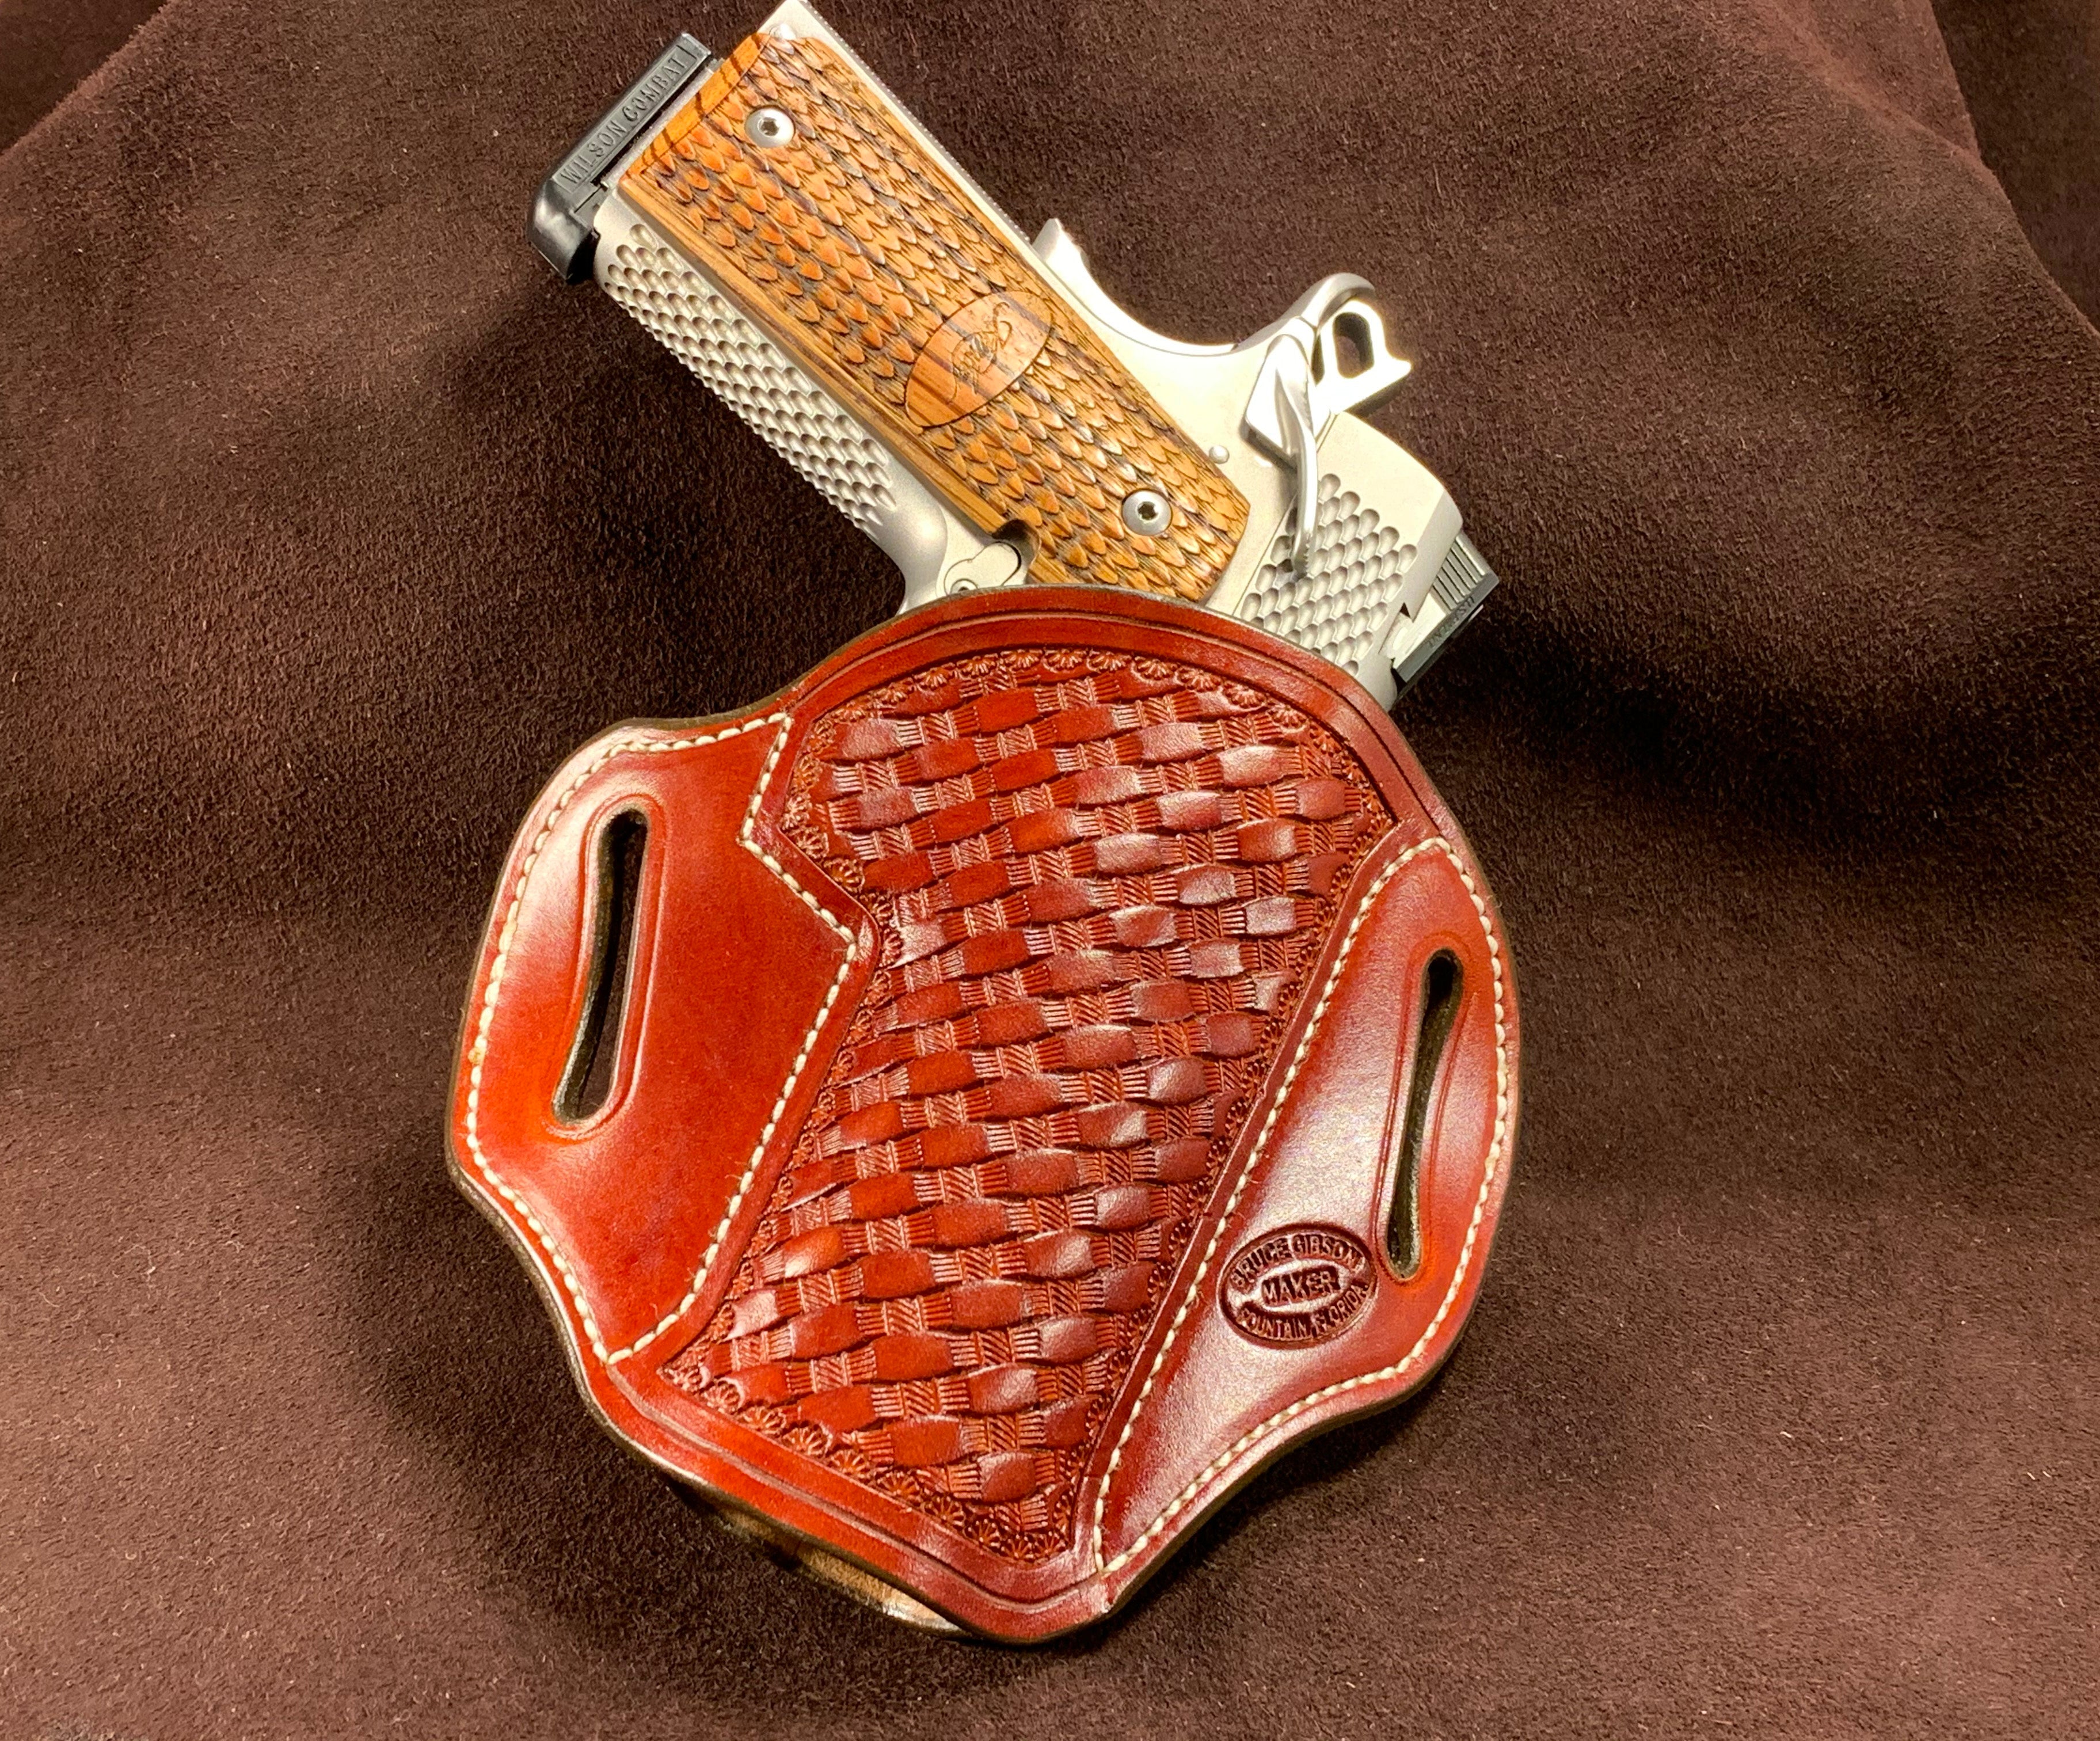 GIBSON 1911 4"-4.25" LEATHER HOLSTER ROPE BASKET LIGHT BROWN ALPHA RH OWB--SOLD OUT.